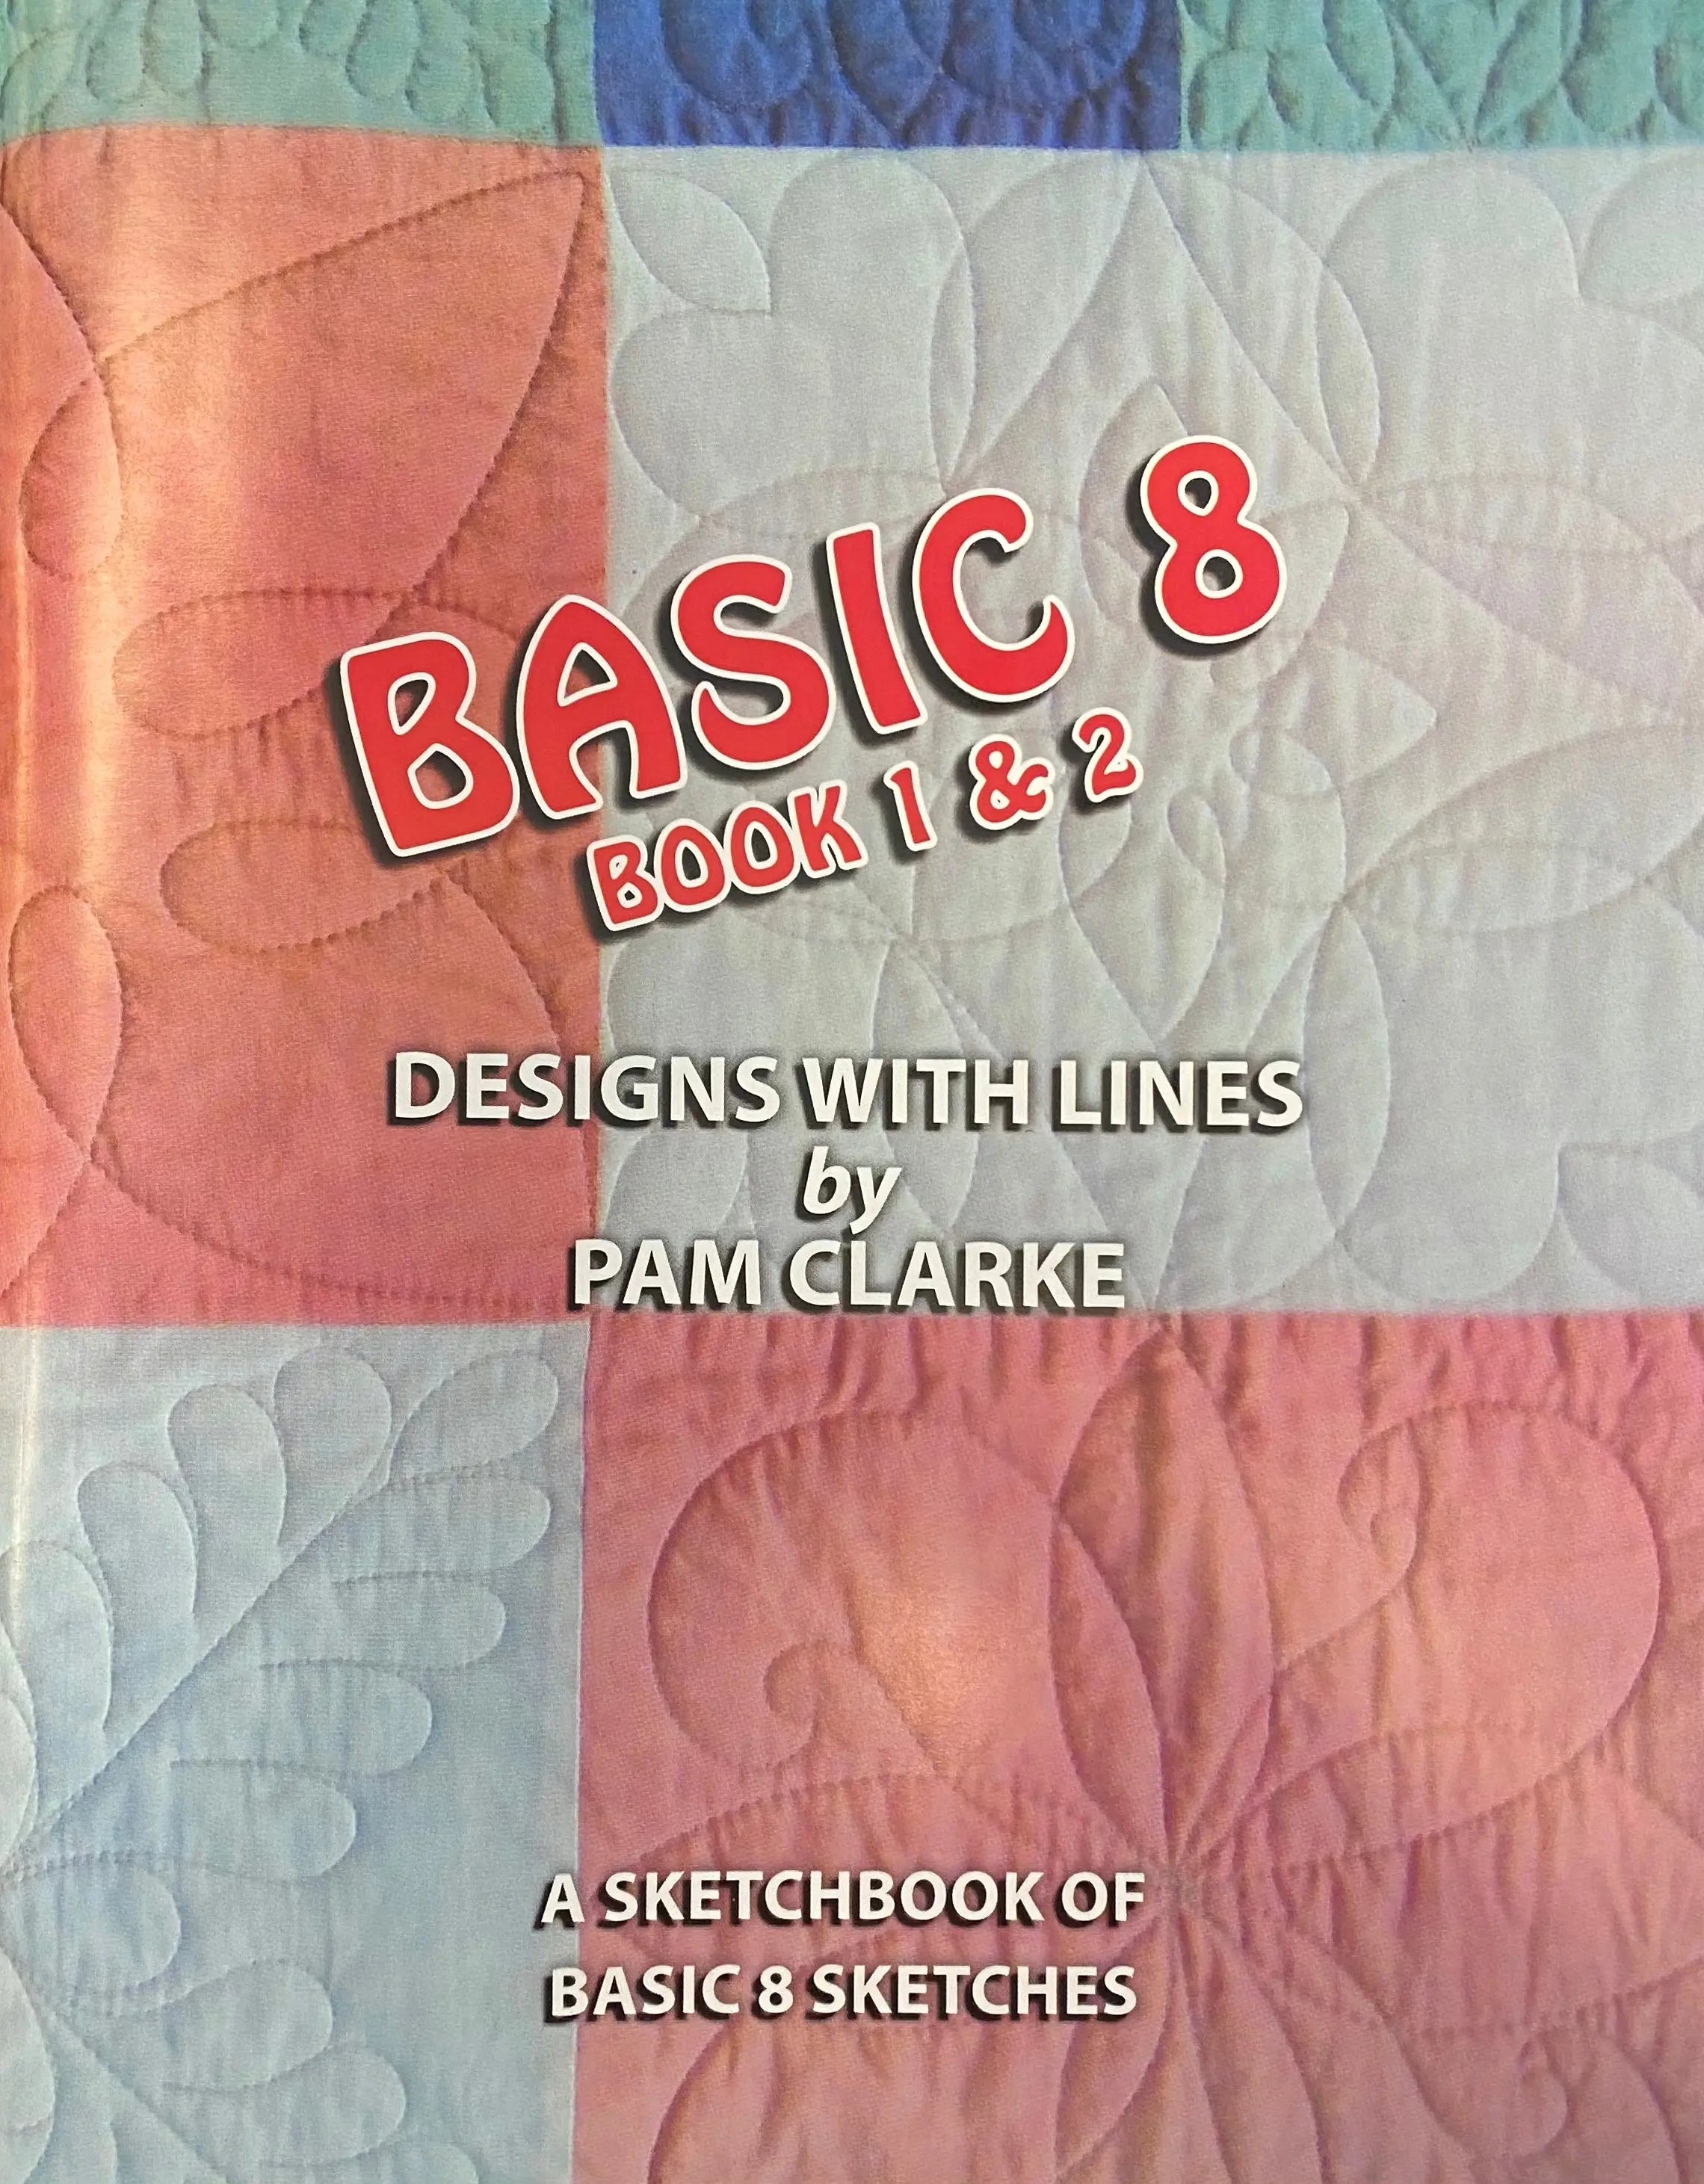 1887 Basic 8 Lines Book 1 & 2 - Linda's Electric Quilters